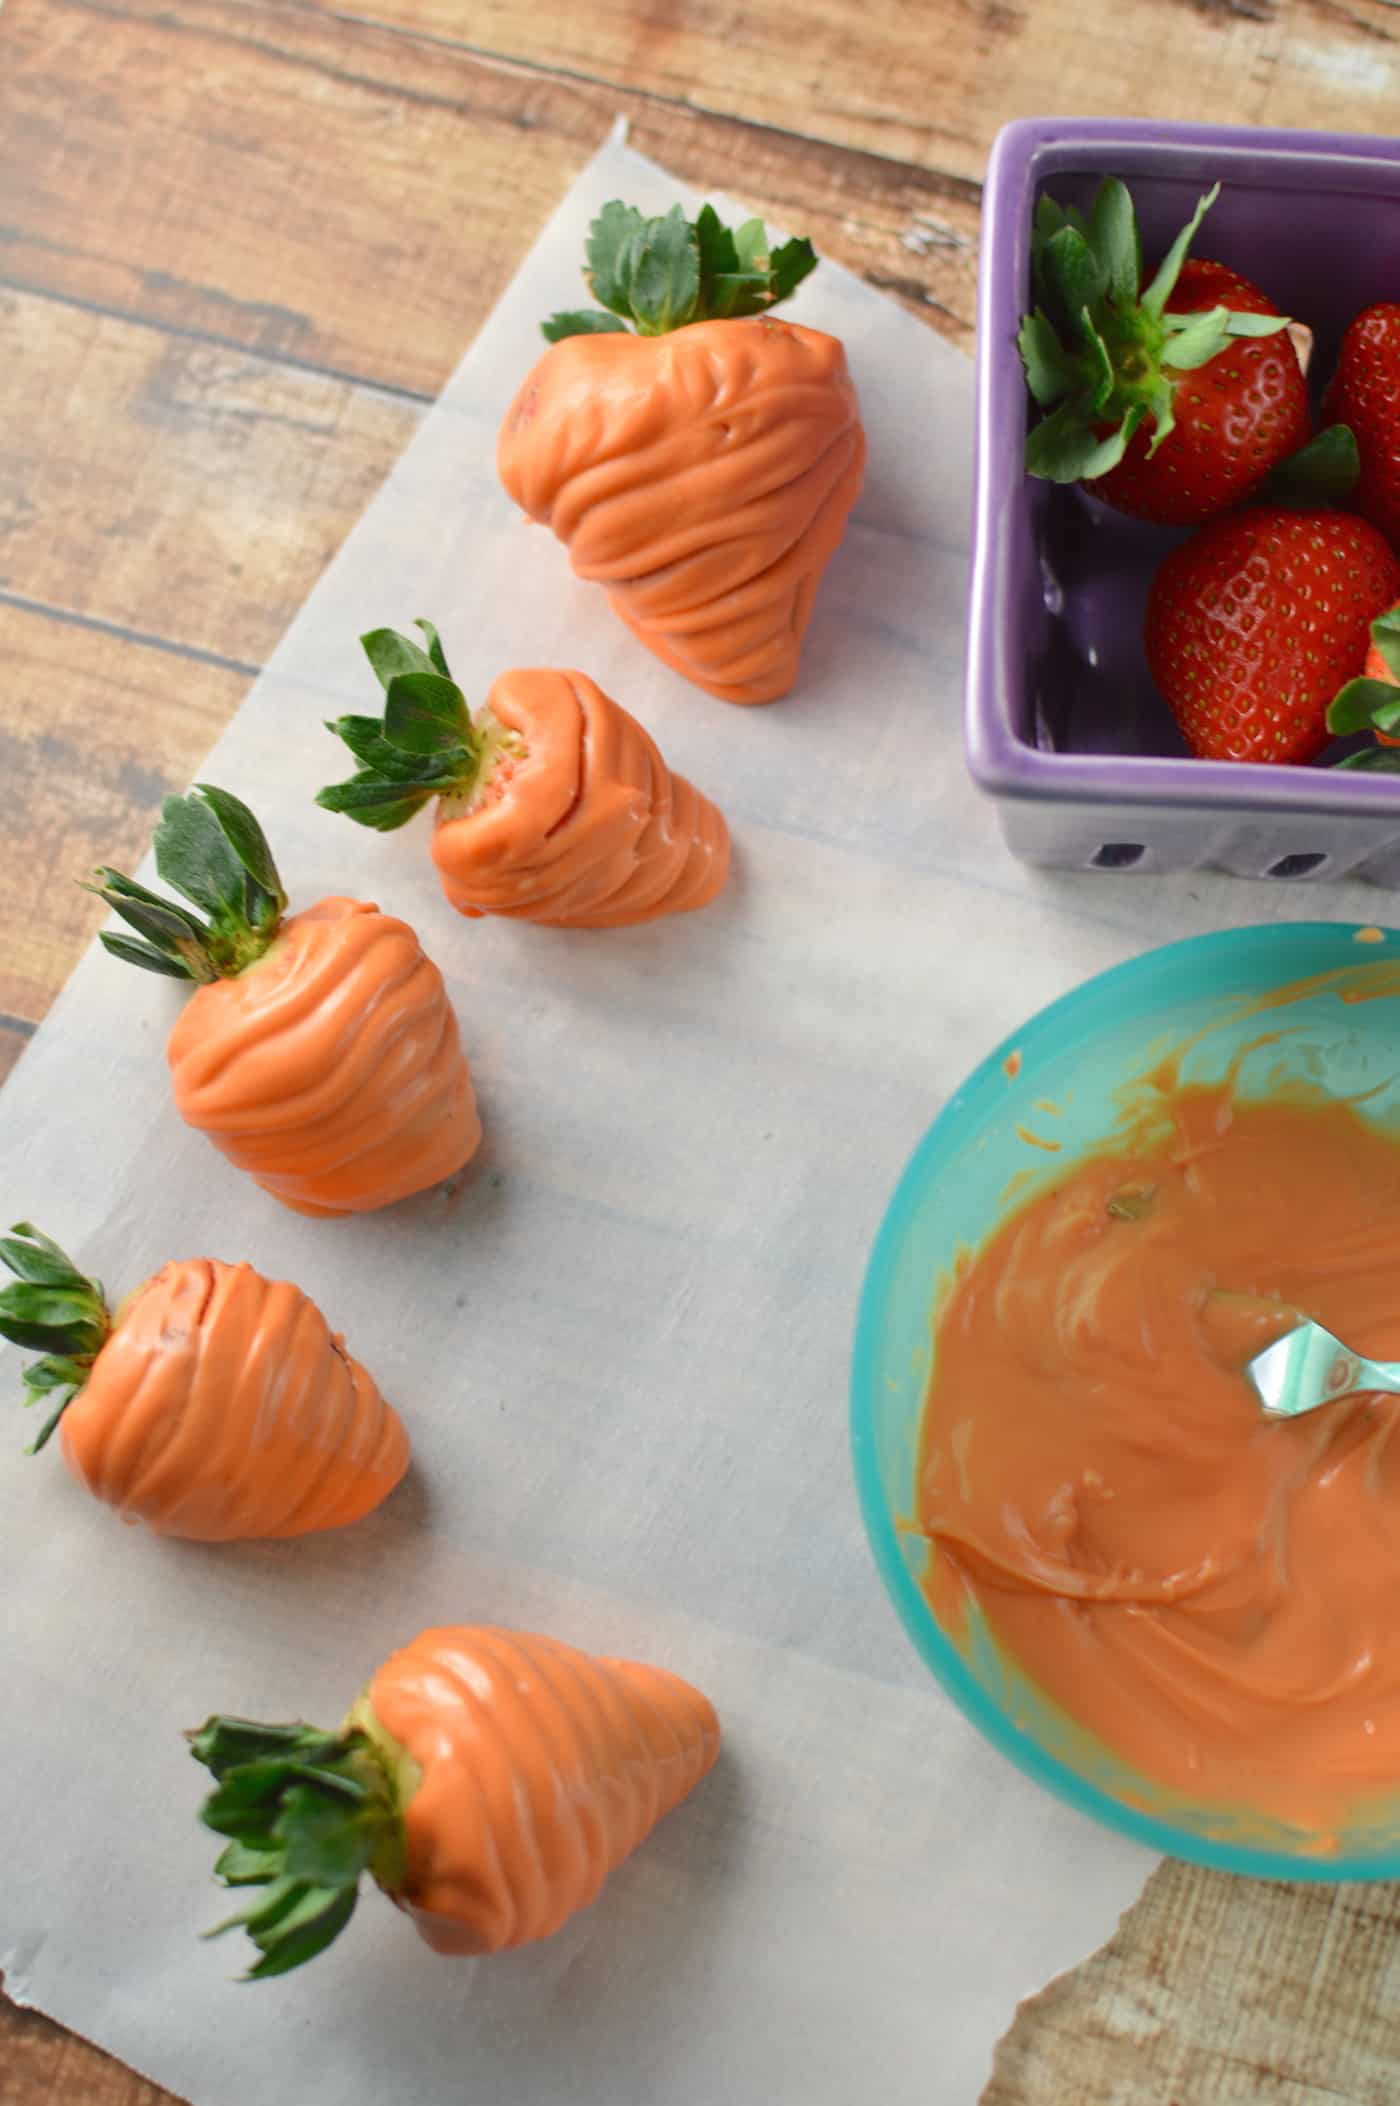 How to make strawberries that look like carrots